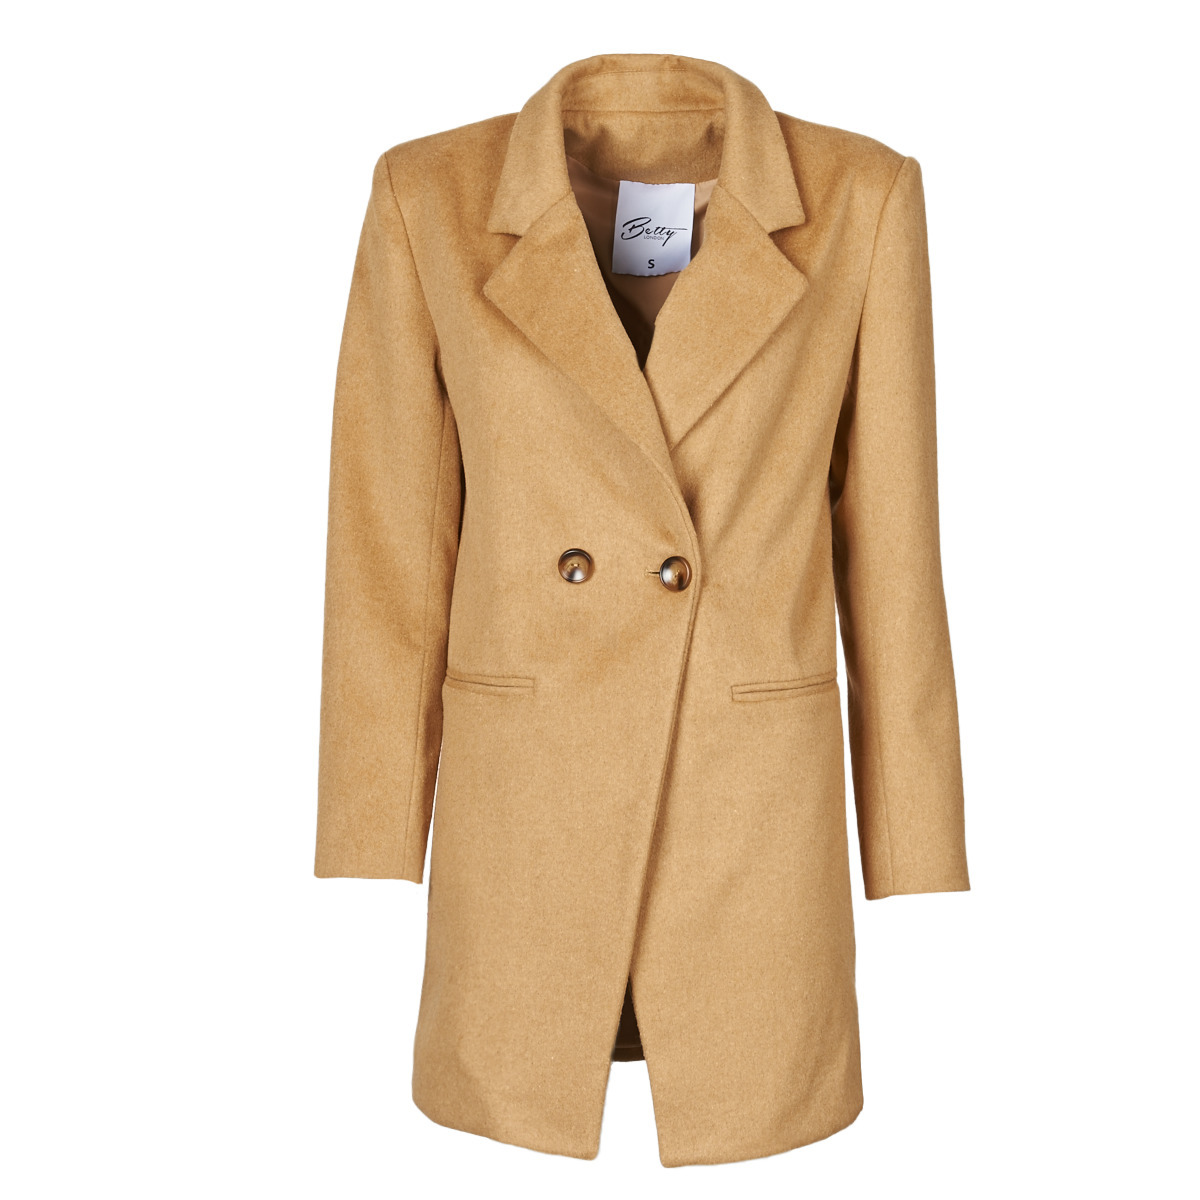 Betty London - Coat Beige for Woman at Spartoo GOOFASH